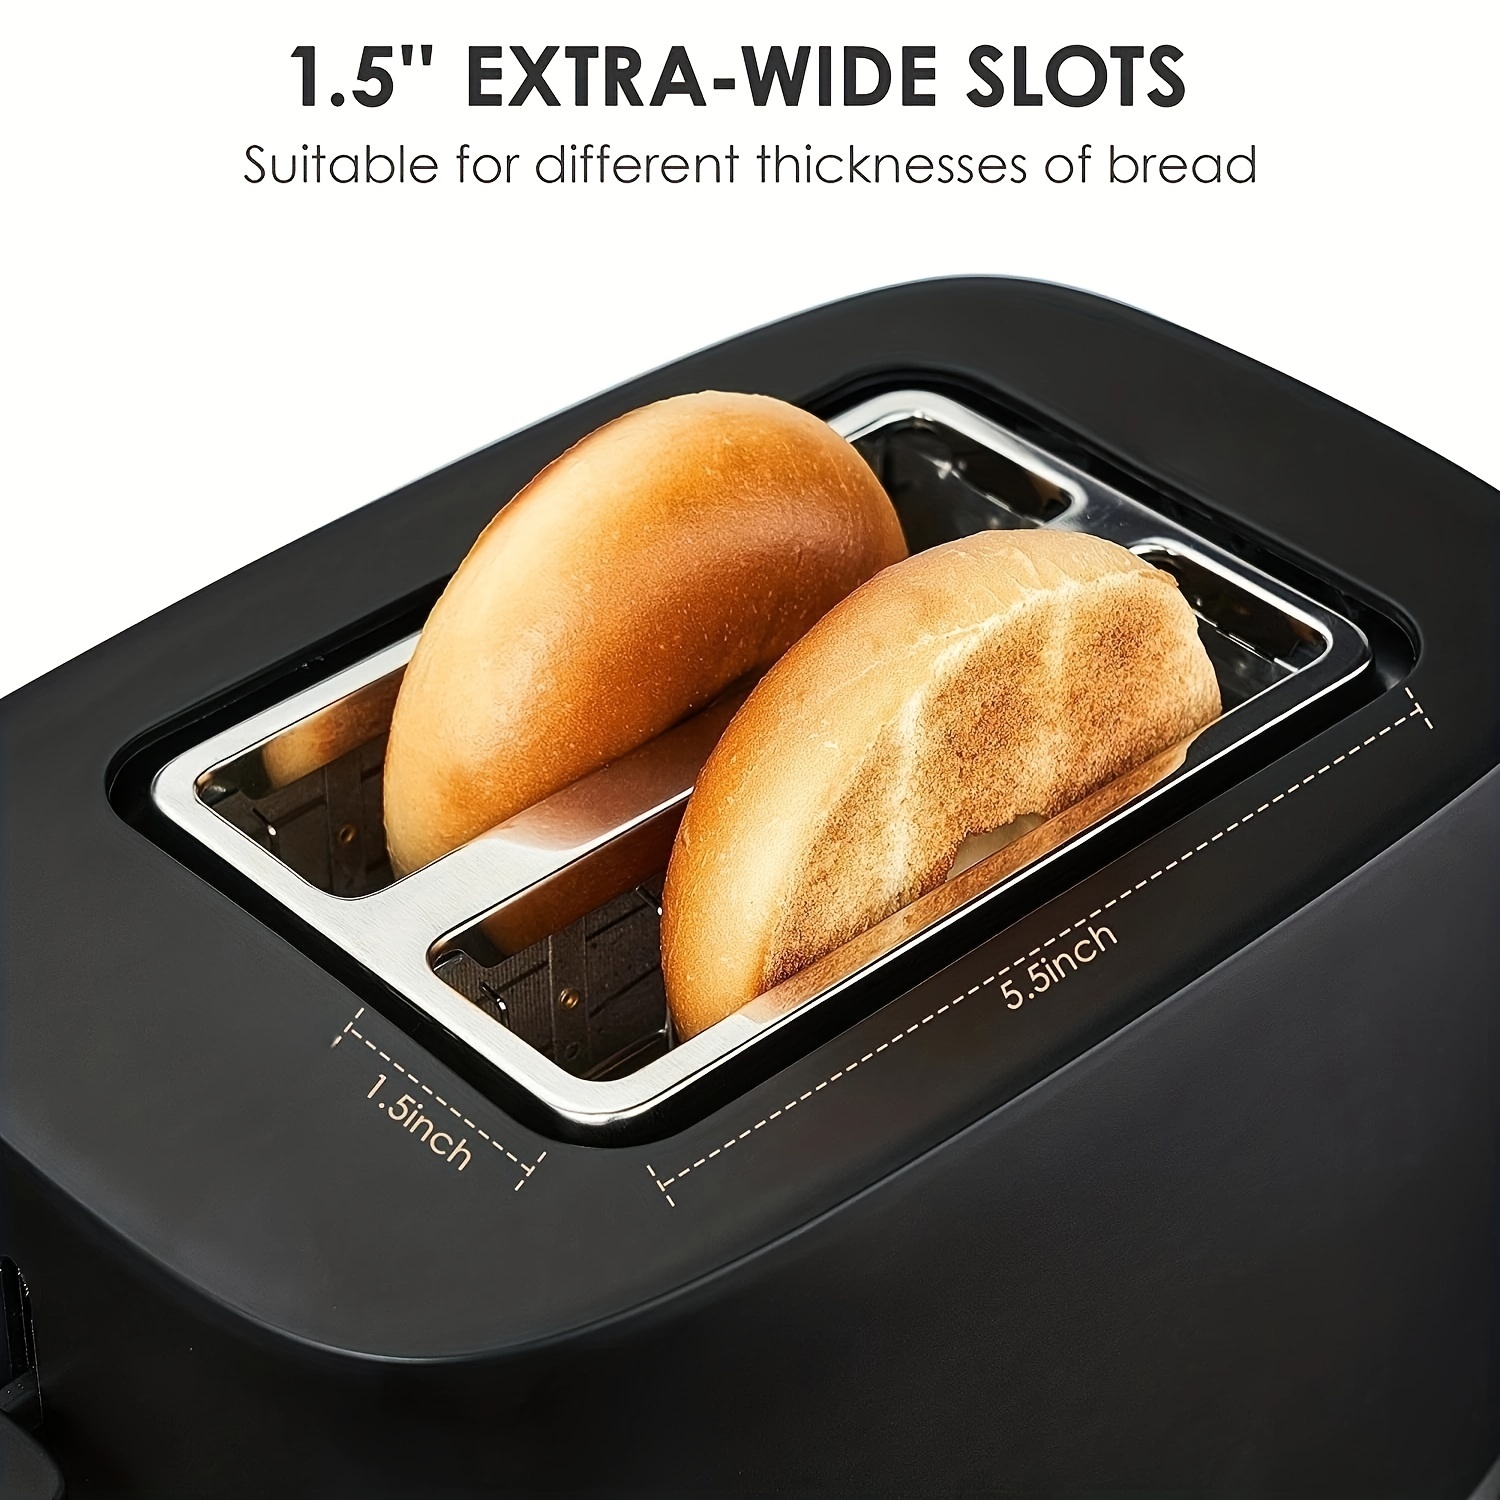 prepAmeal Long Slot Toaster 2 Slice Toaster with 6 Shade Settings,  Bagel/Cancel, Extra Wide Slots, Removable Crumb Tray, for Bagels, Waffles,  Breads